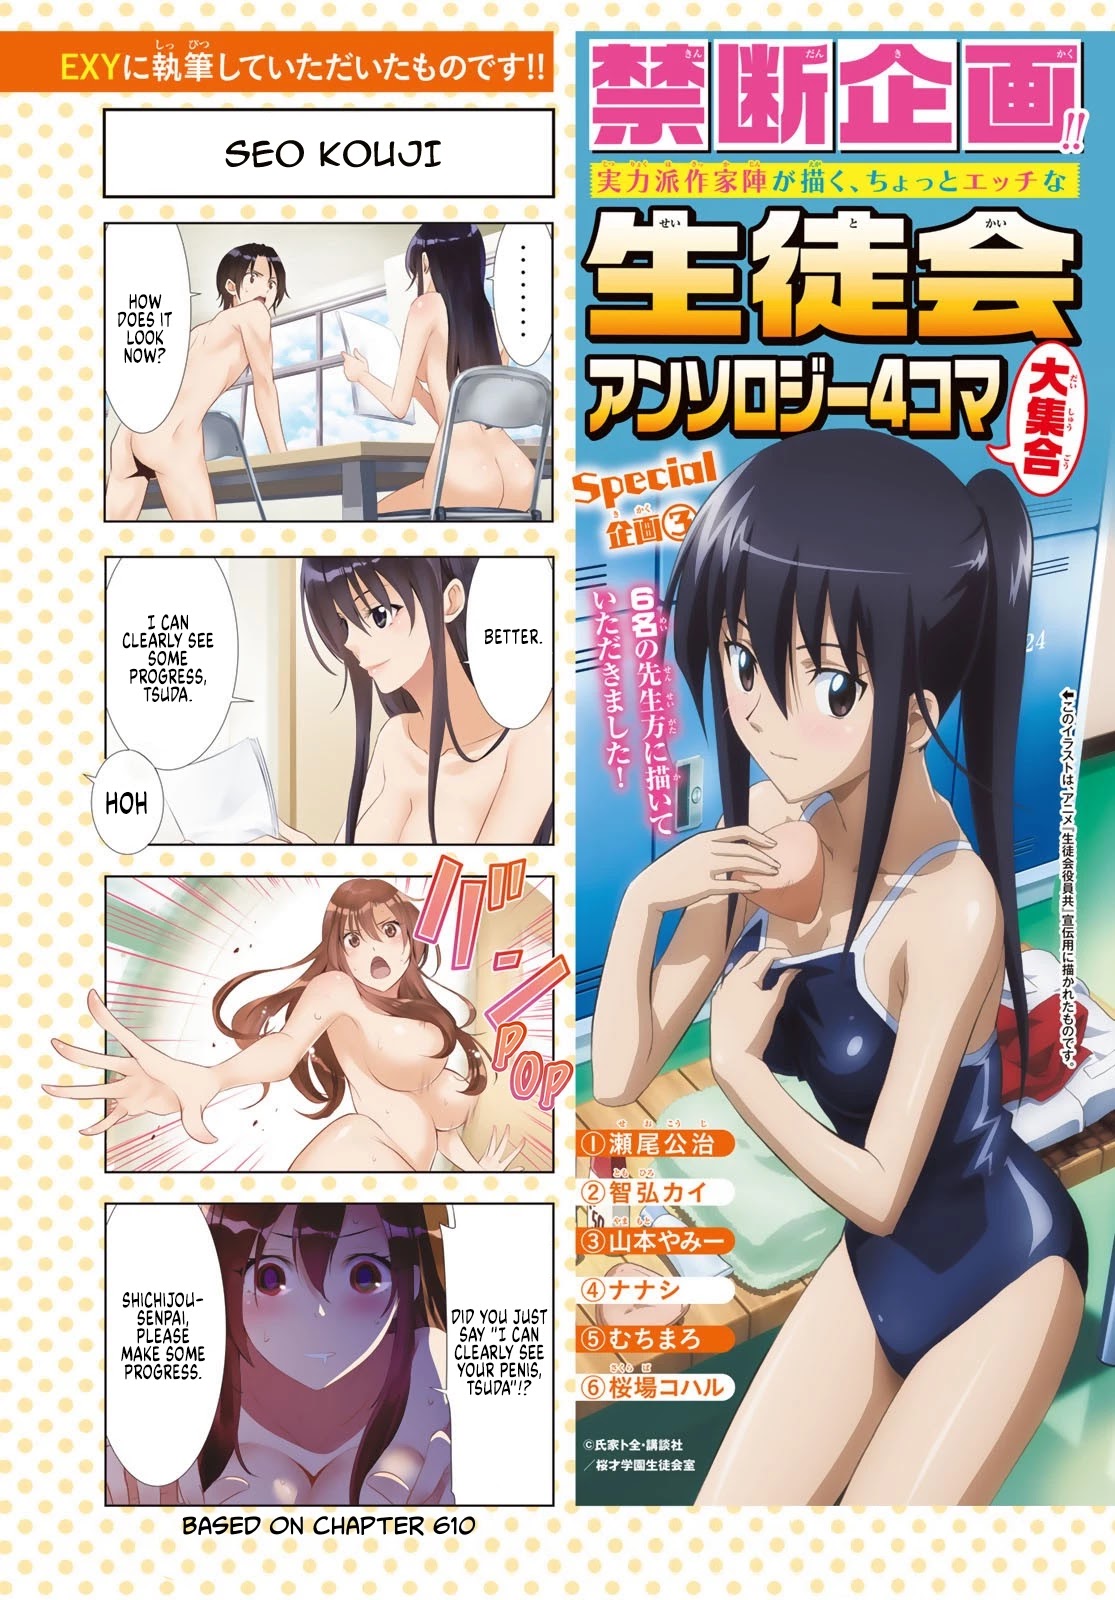 Seitokai Yakuindomo Chapter 641.5: Special Extra Chapters By Other Authors - Picture 1